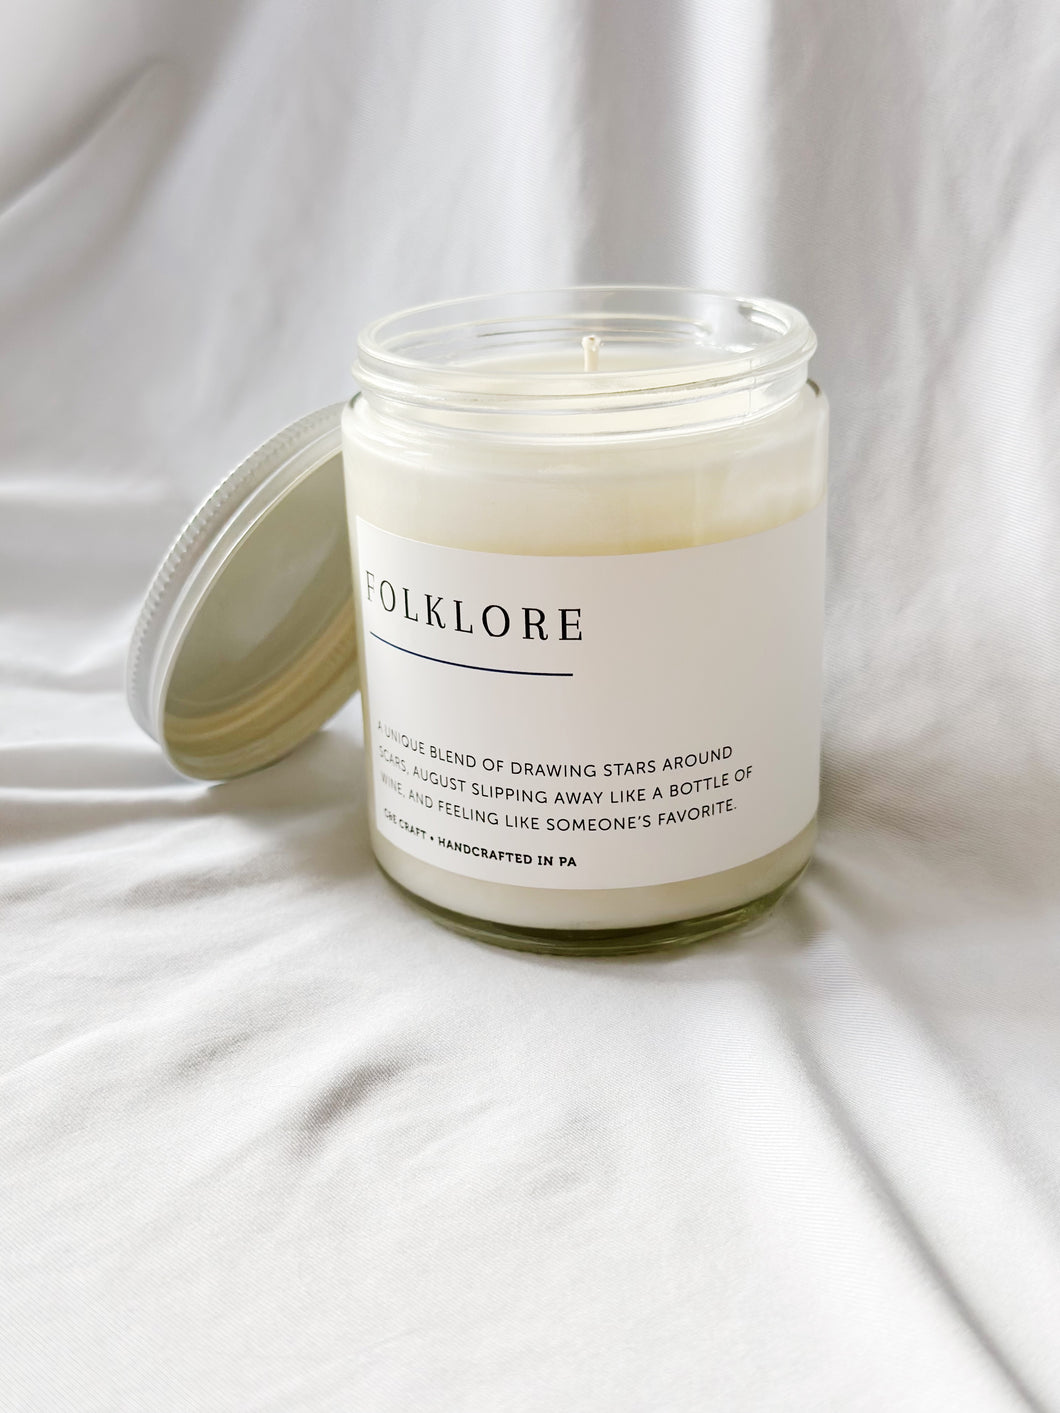 Folklore Soy Wax Candle - Taylor Swift Inspired